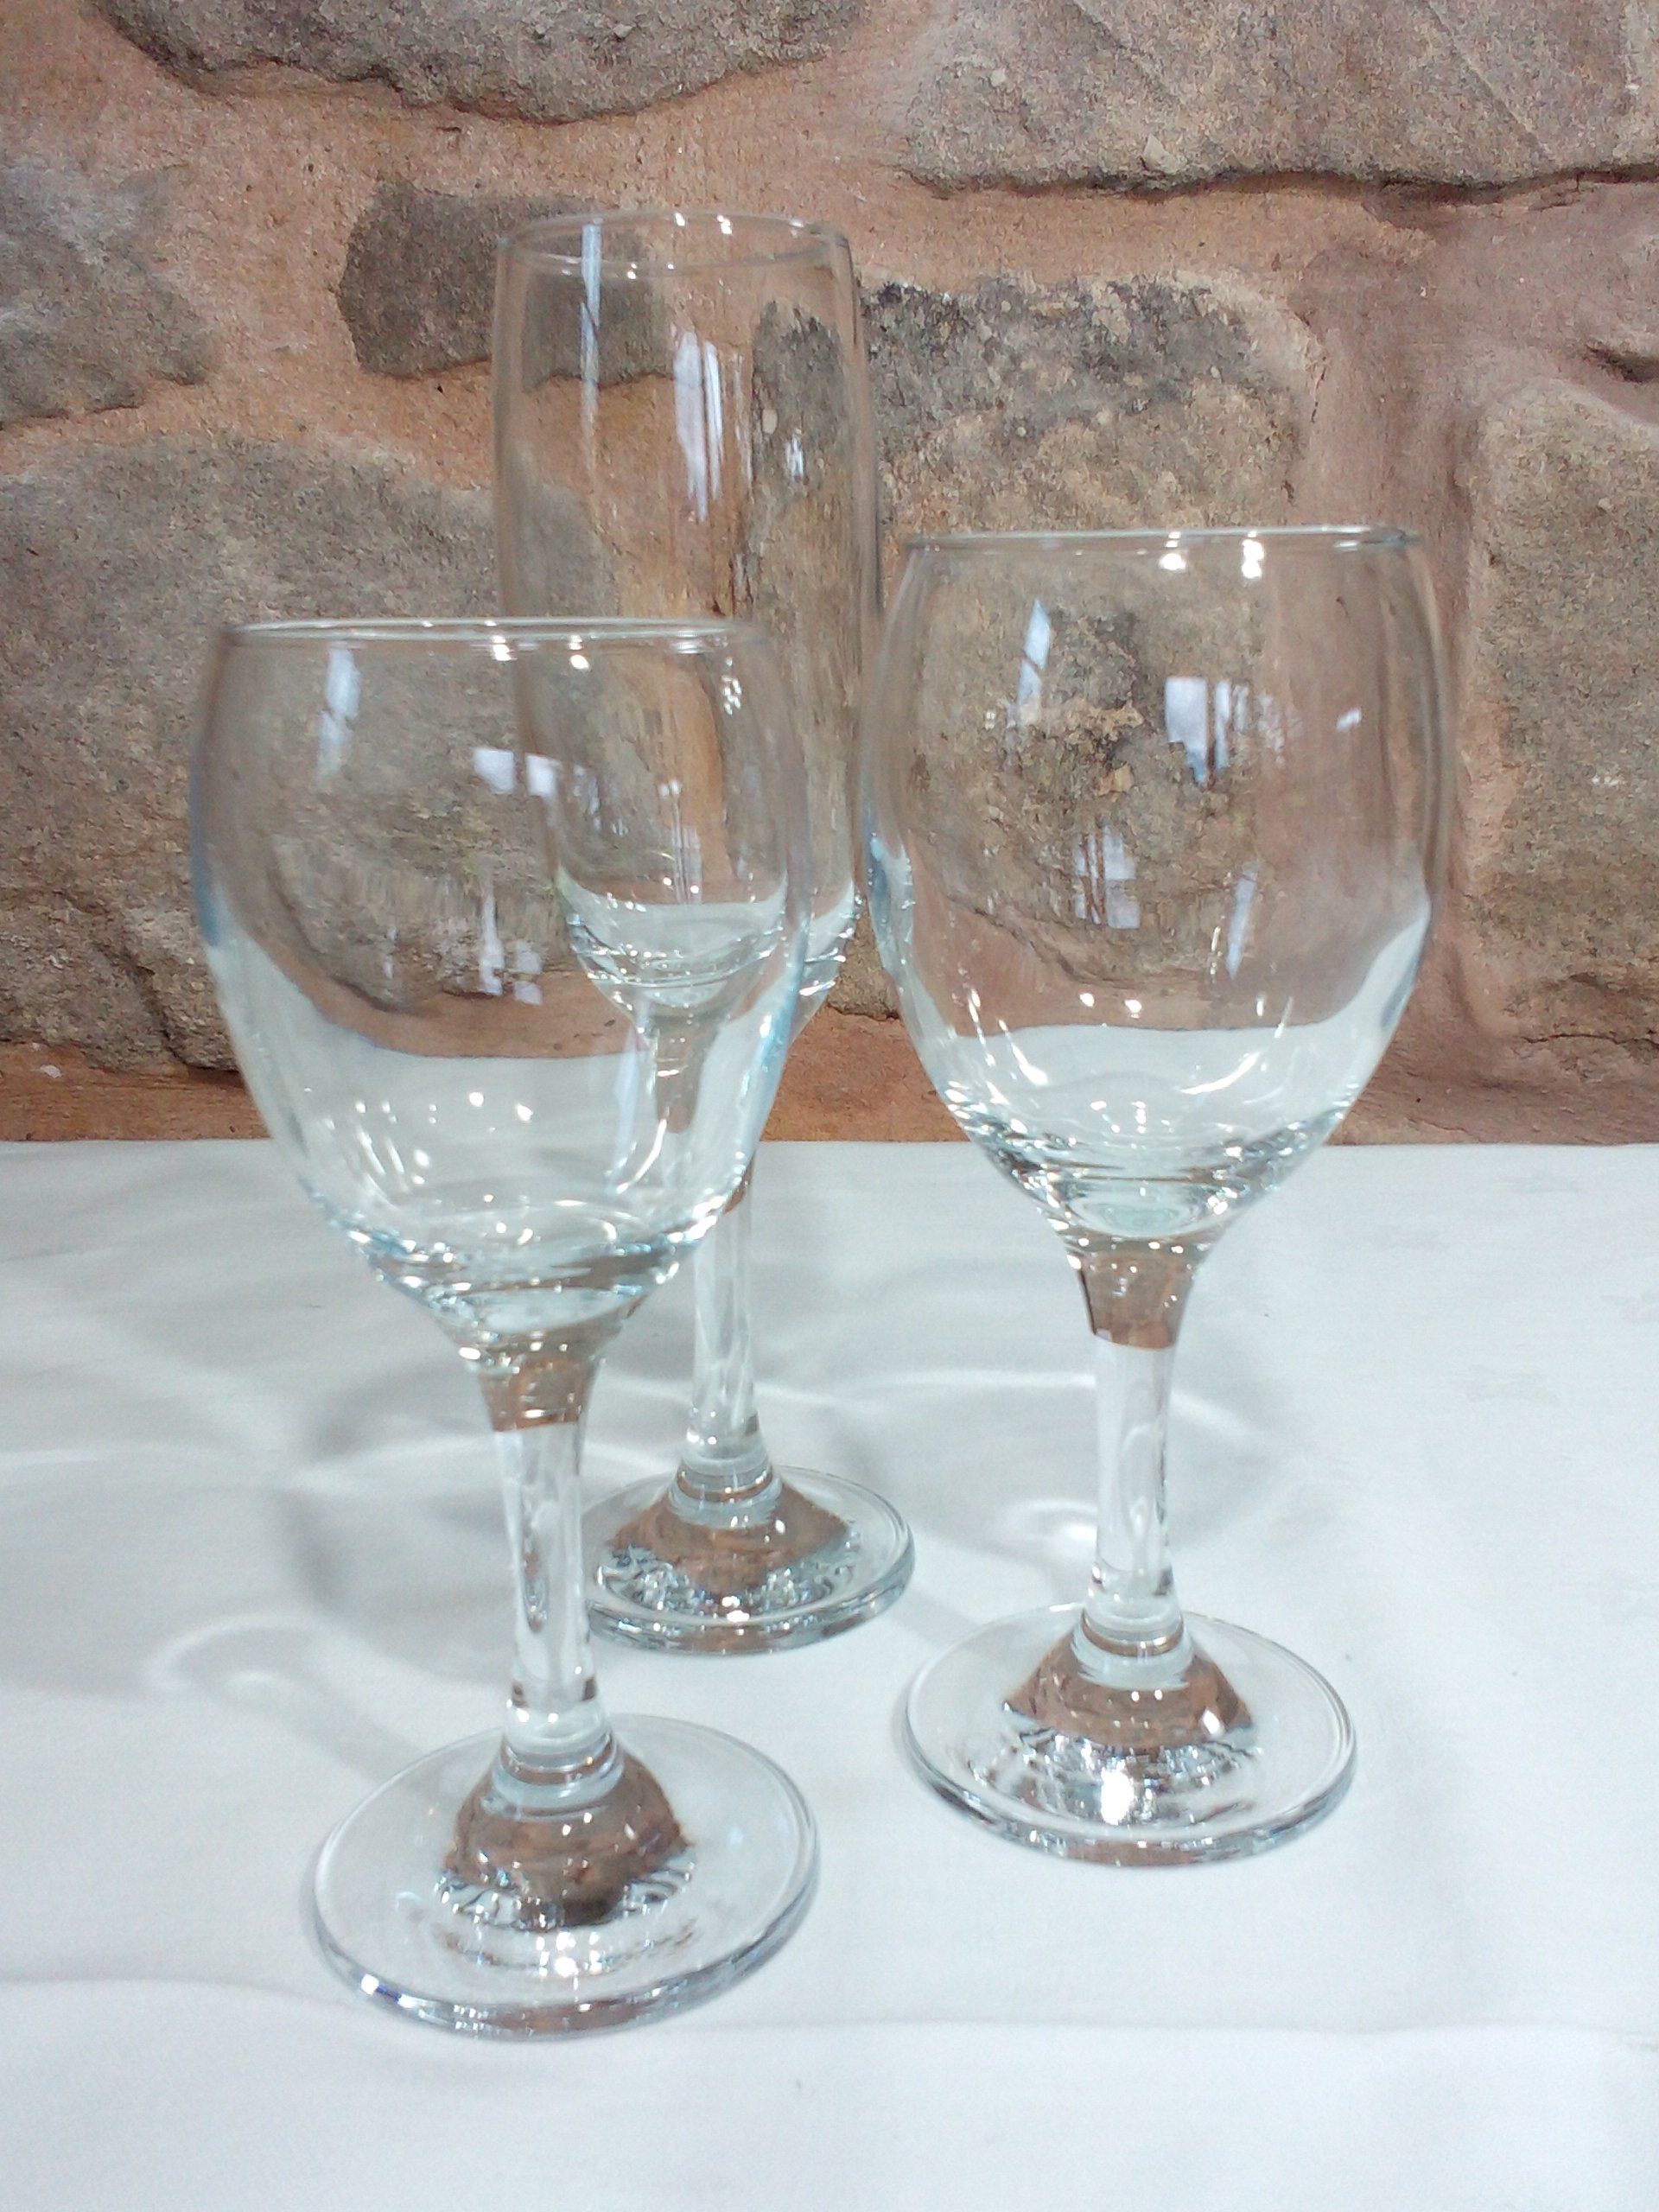 Imperial and Flute wine glass hire, Return Clean or Dirty Option Available